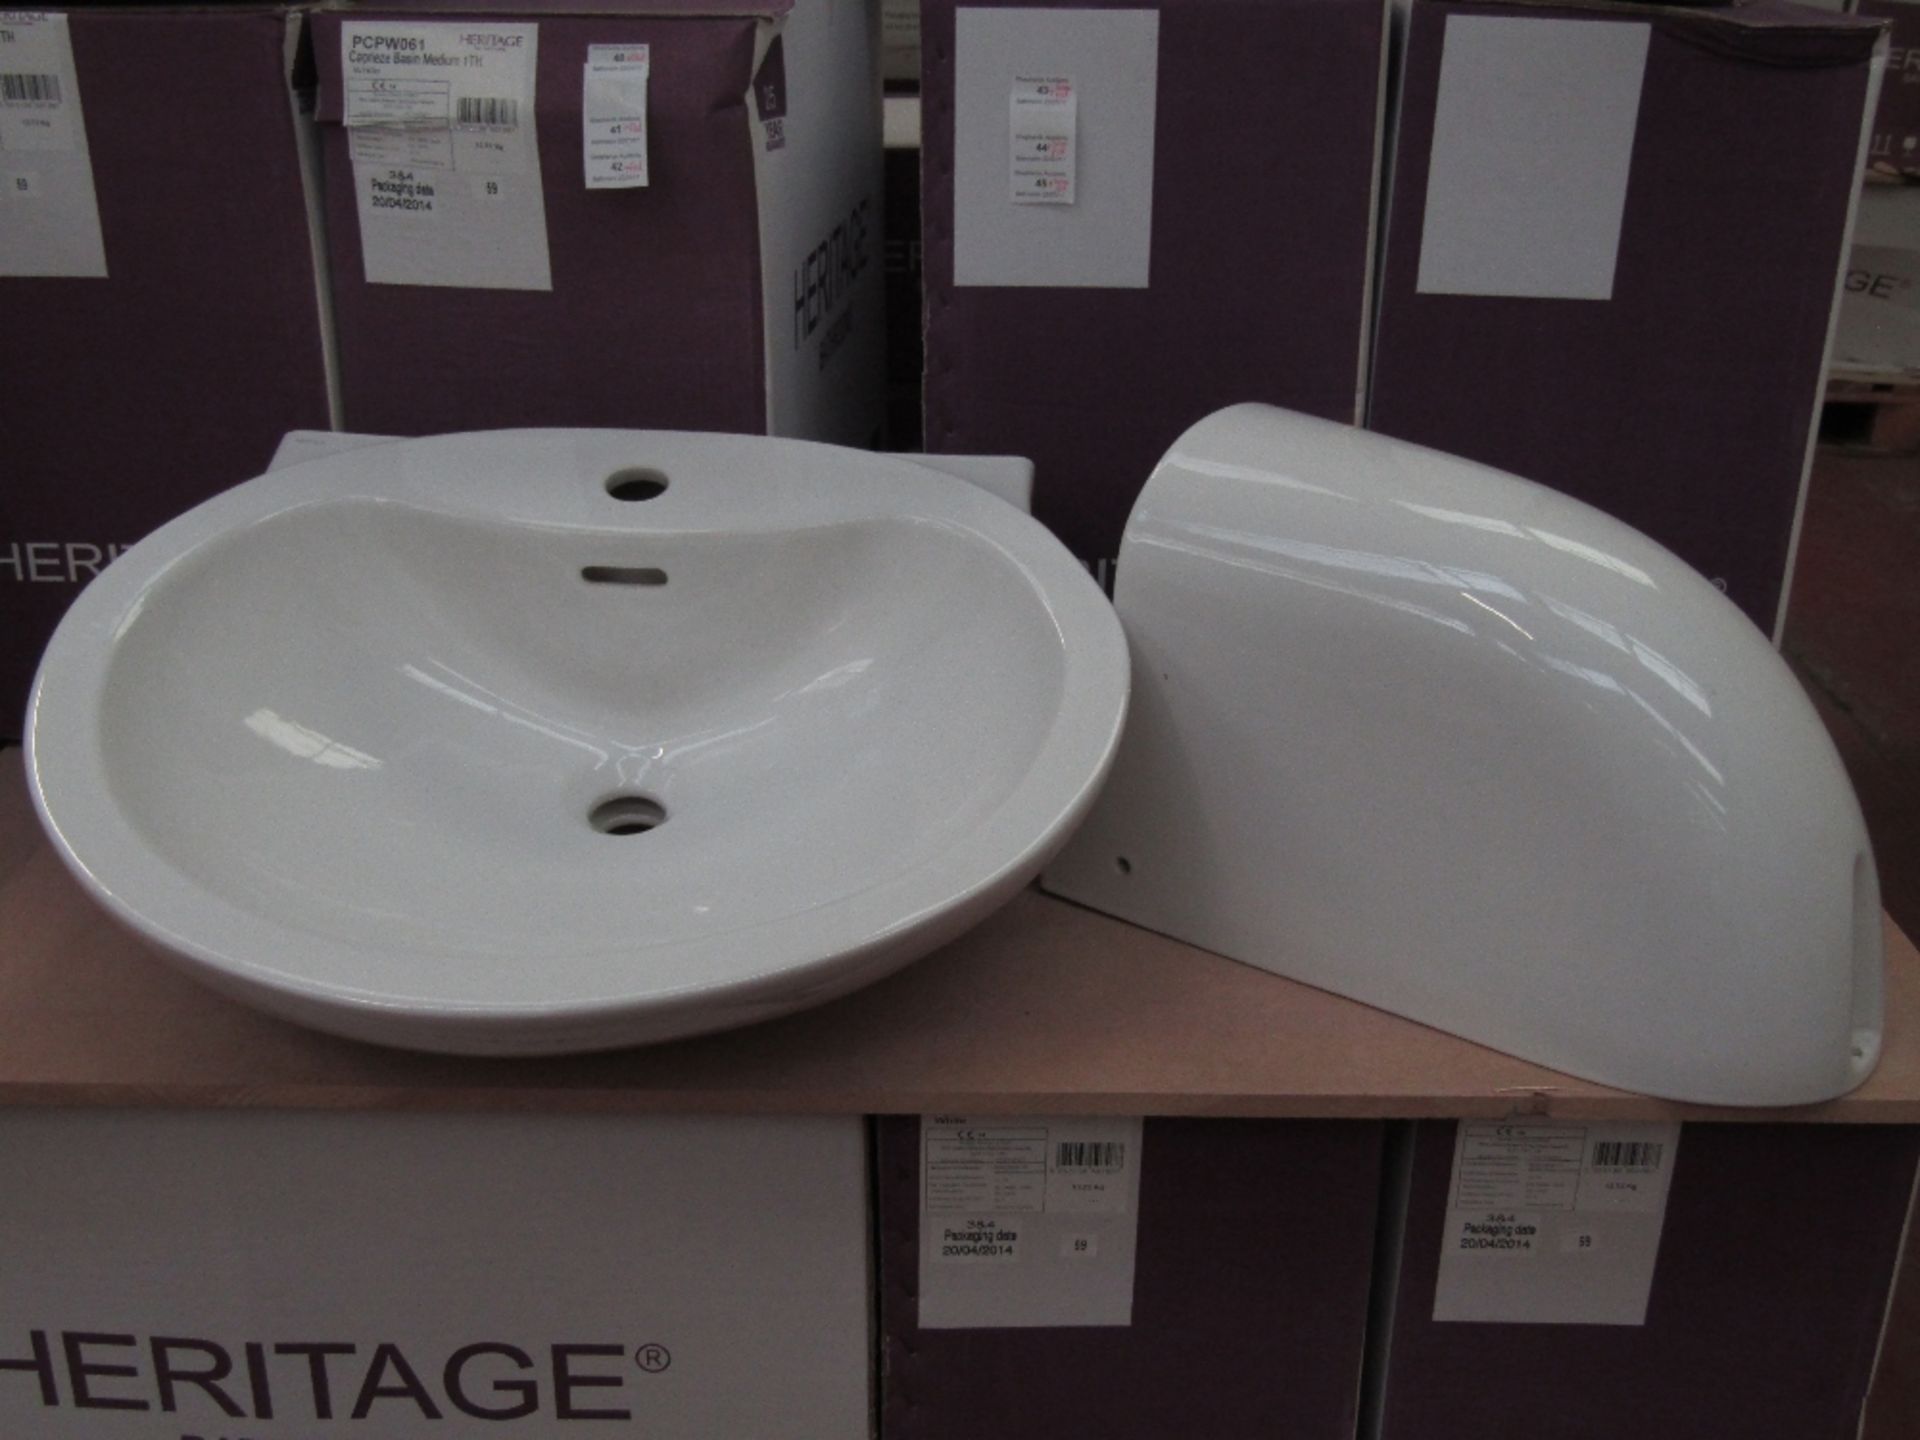 Heritage Bathrooms Caprieze Basin Medium 1TH with Caprieze Wall Hung Pedestal. Both New & Boxed (two